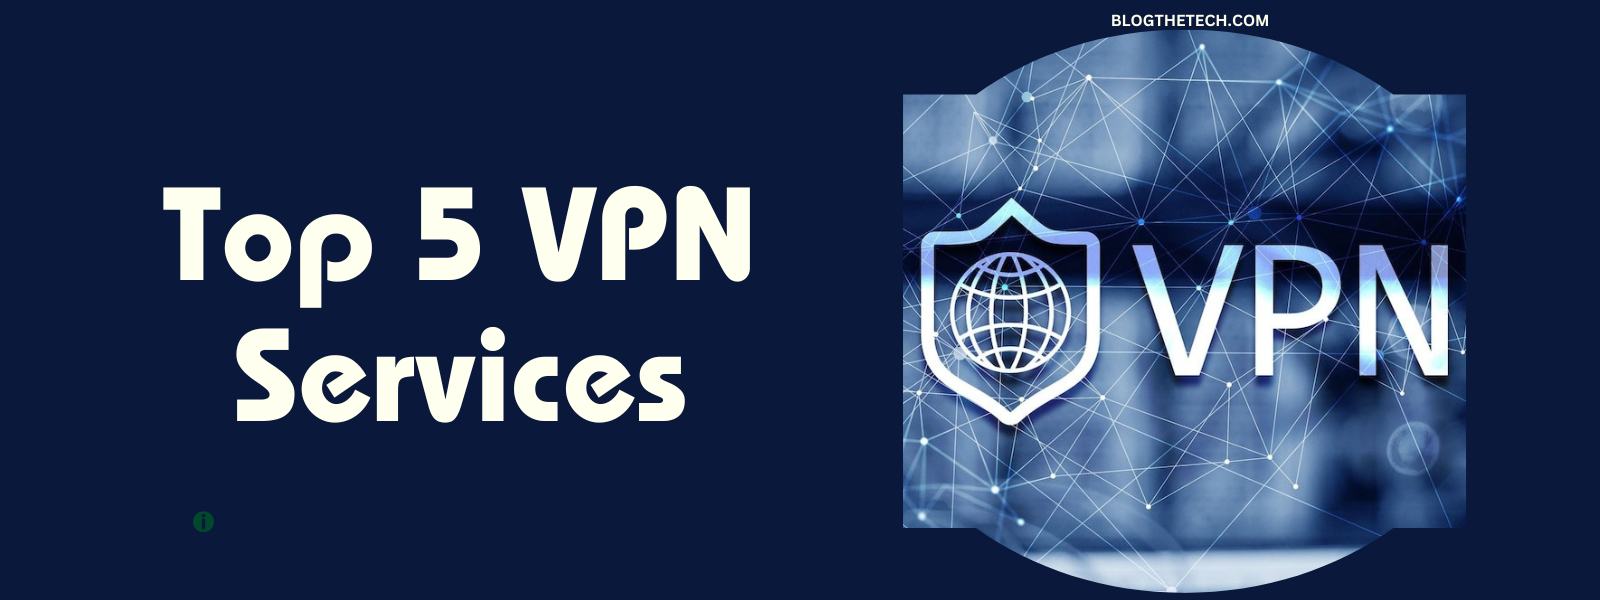 Top 5 VPN services-featured